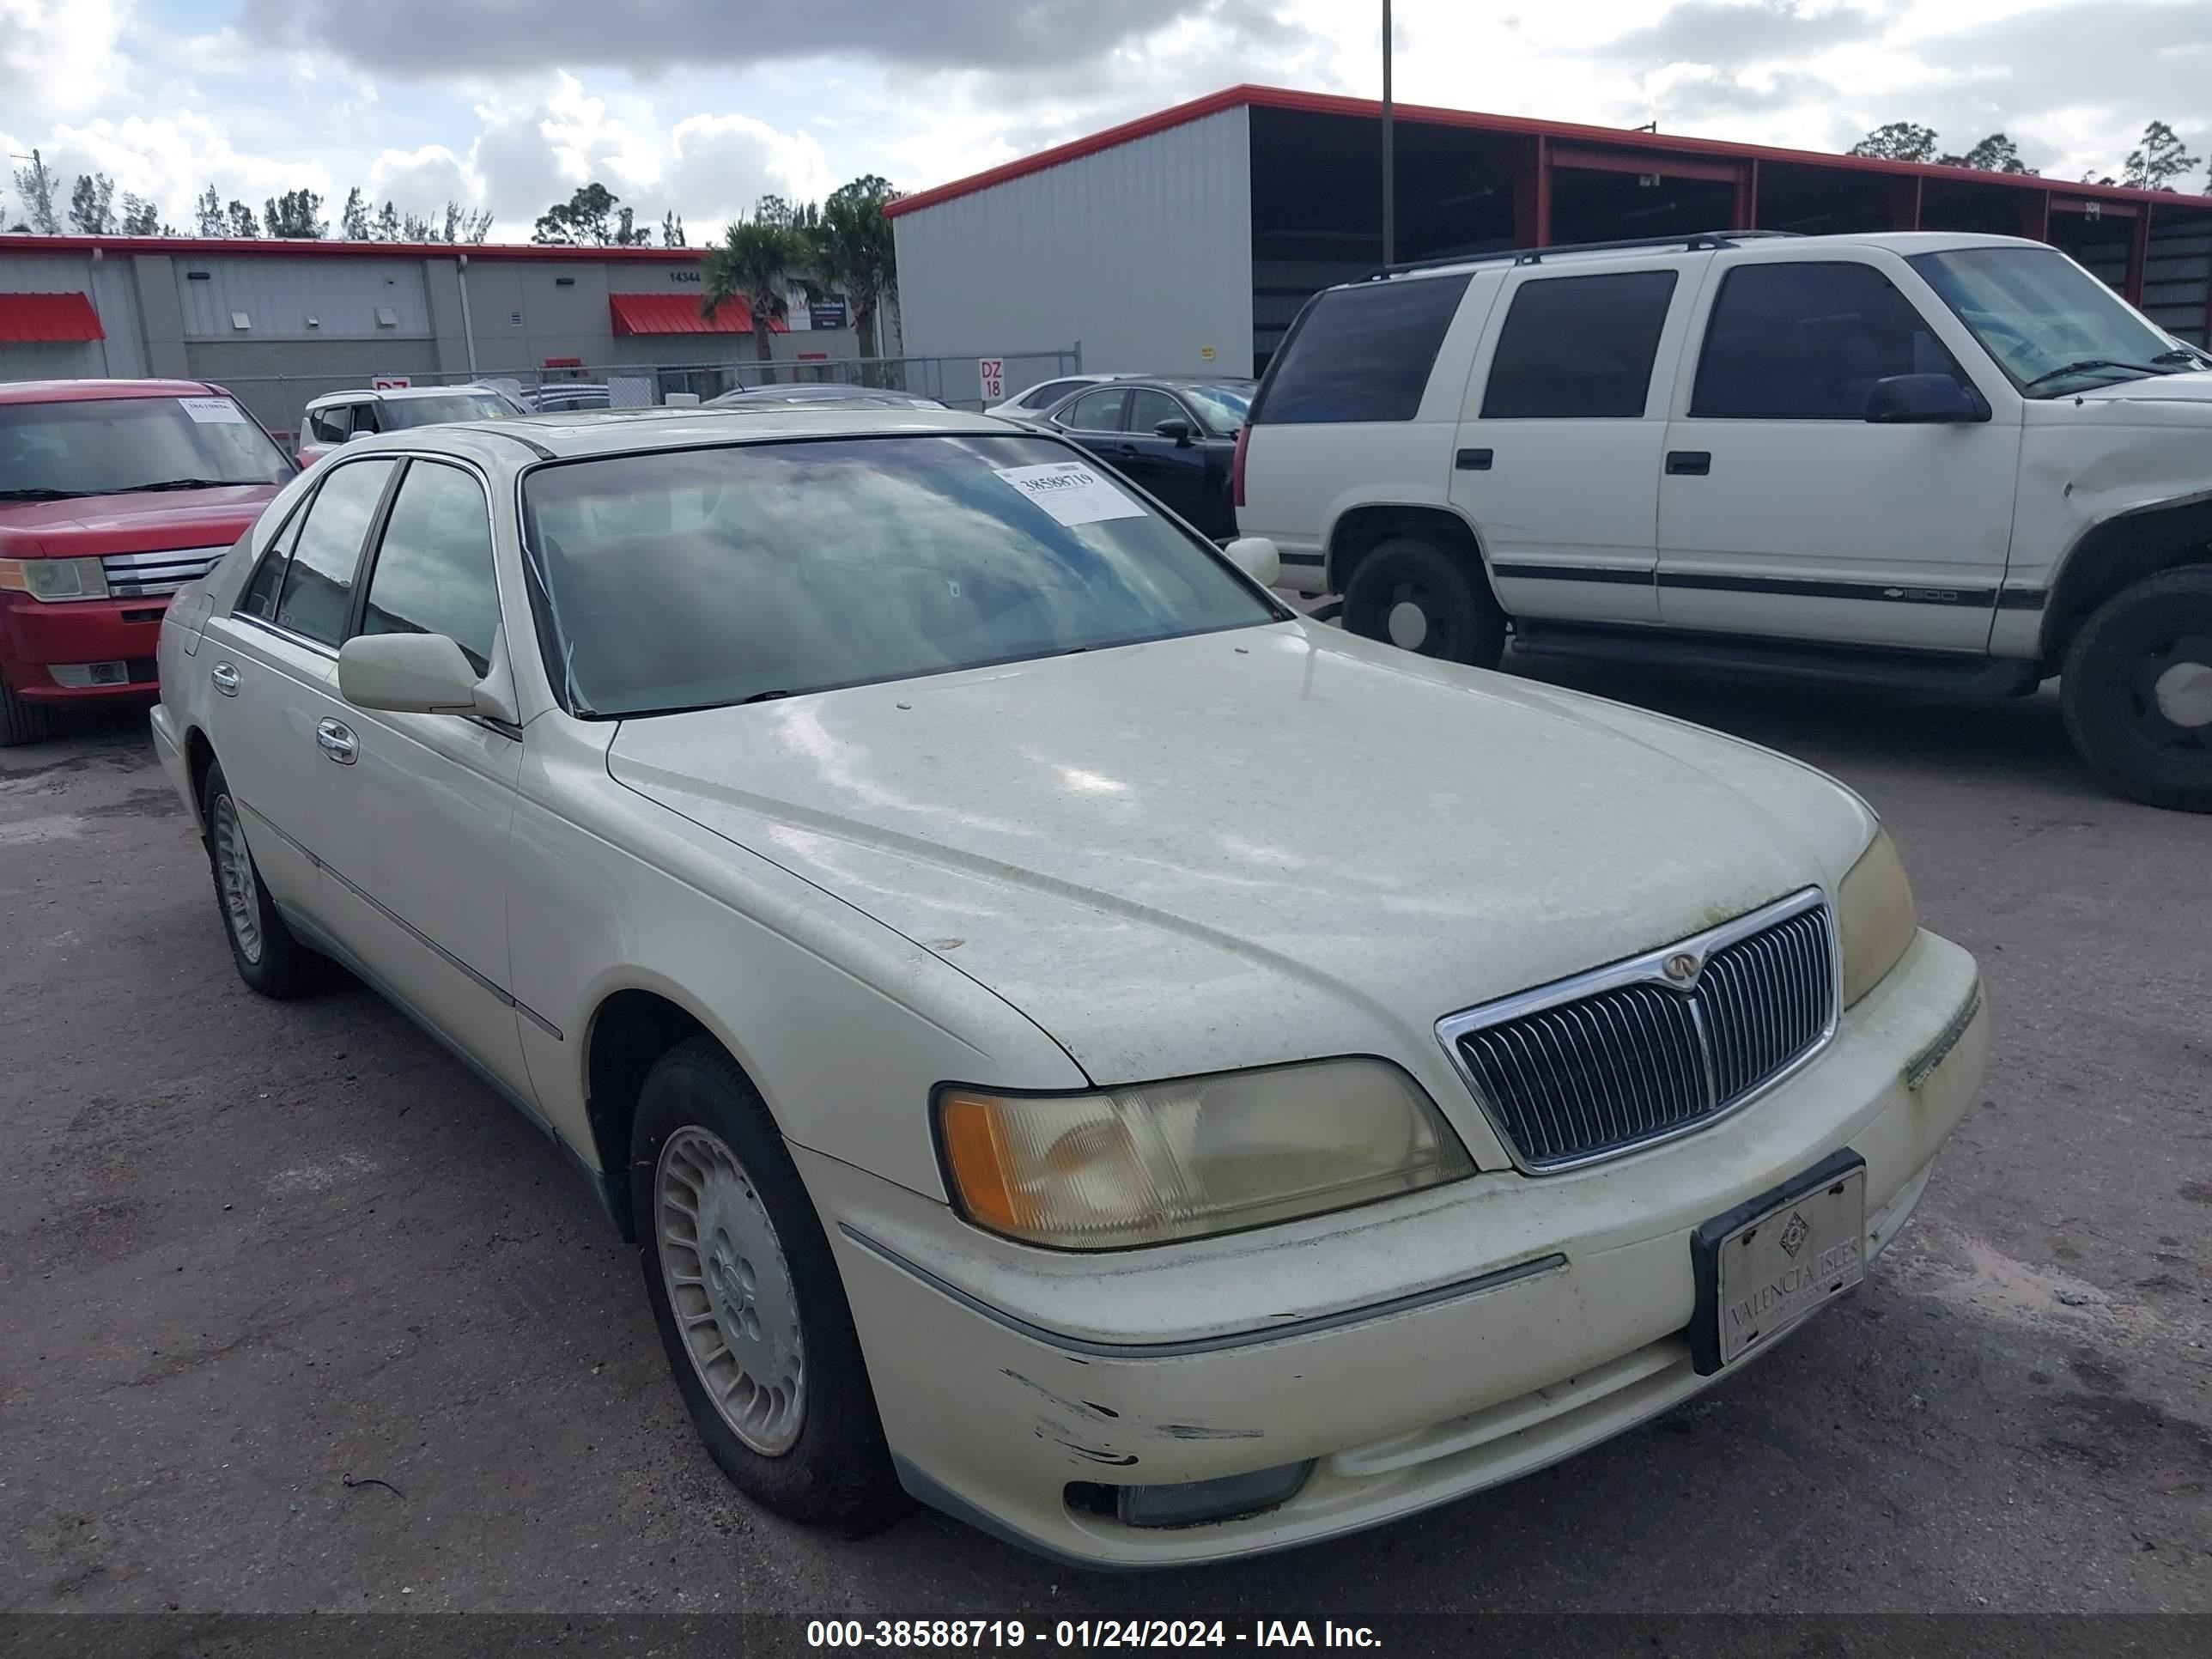 vin: JNKBY31A8WM400155 JNKBY31A8WM400155 1998 infiniti q45 4100 for Sale in 33478, 14344 Corporate Rd S, Jupiter, Florida, USA